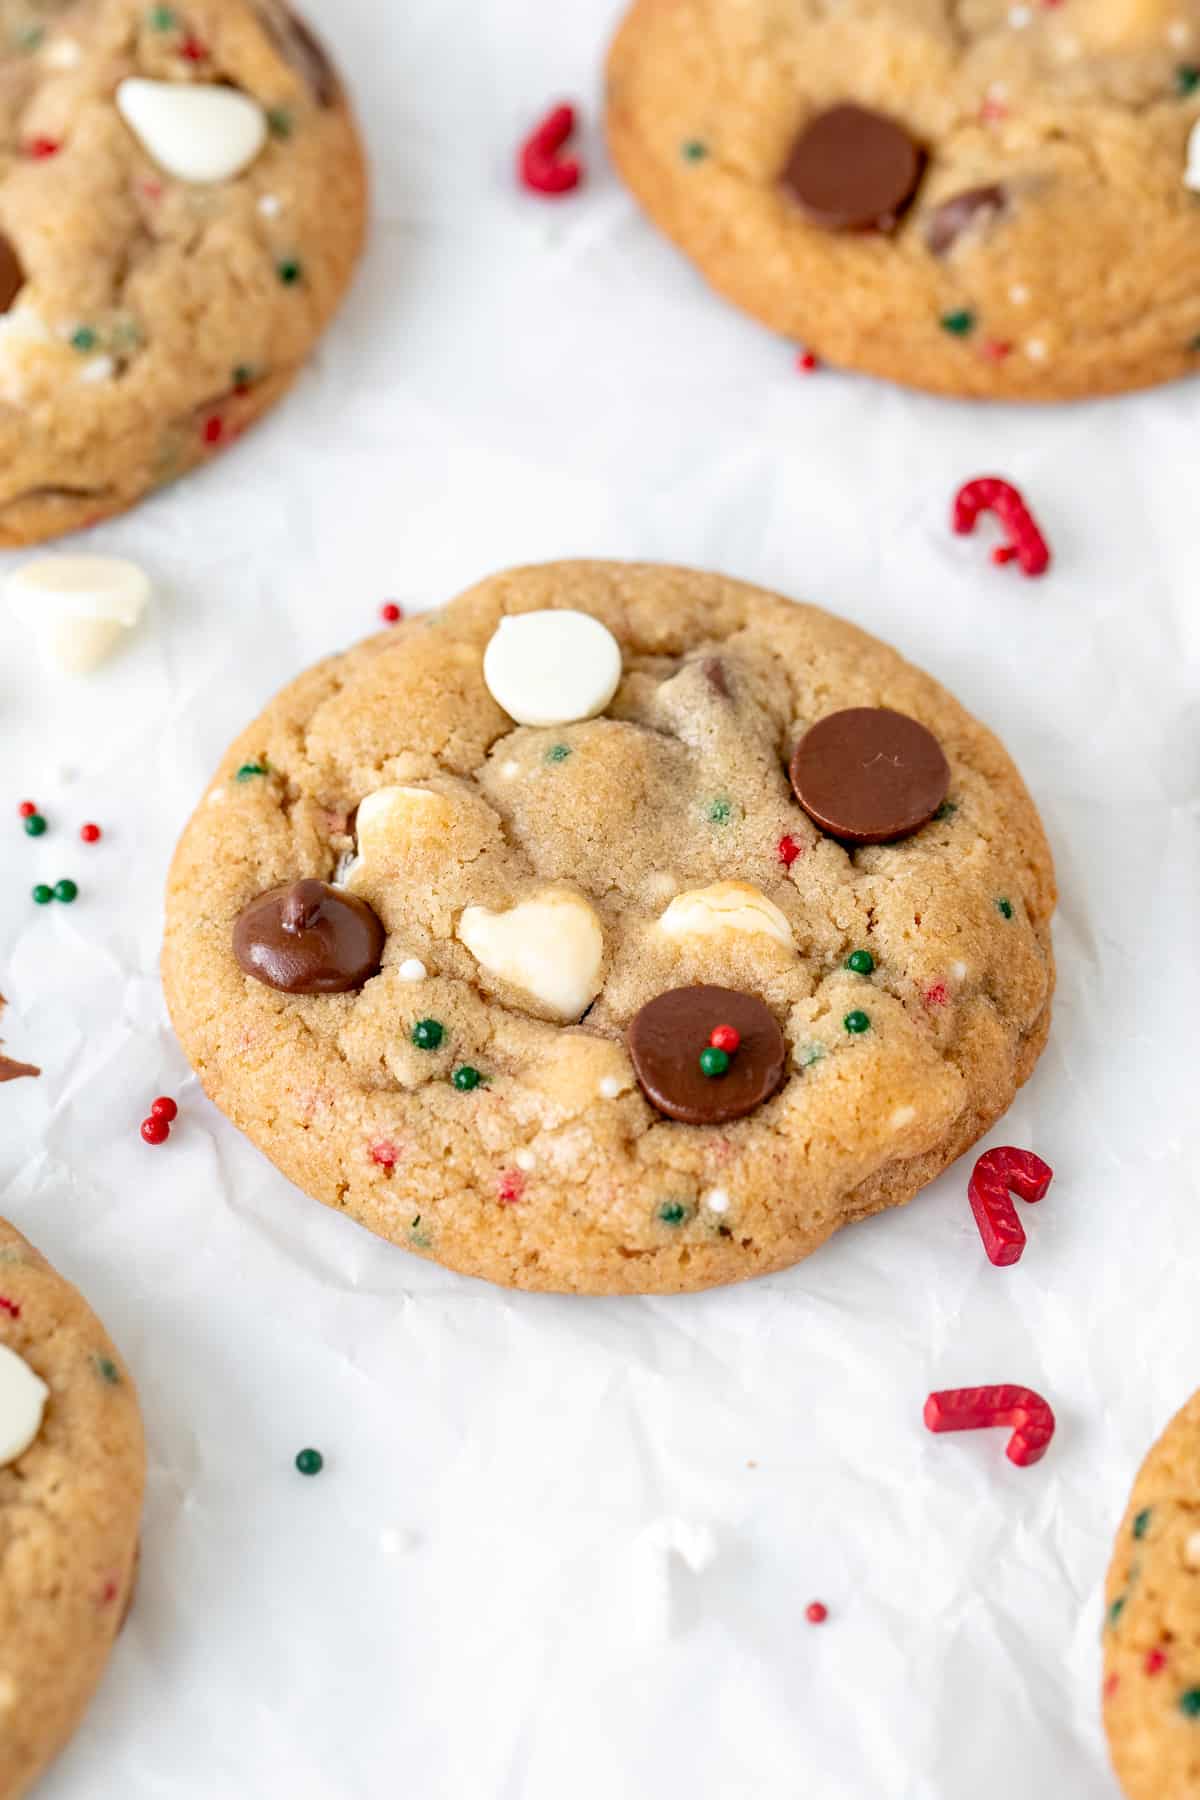 Chocolate chip cookie with white chocolate chips and chocolate chips and red and green sprinkles